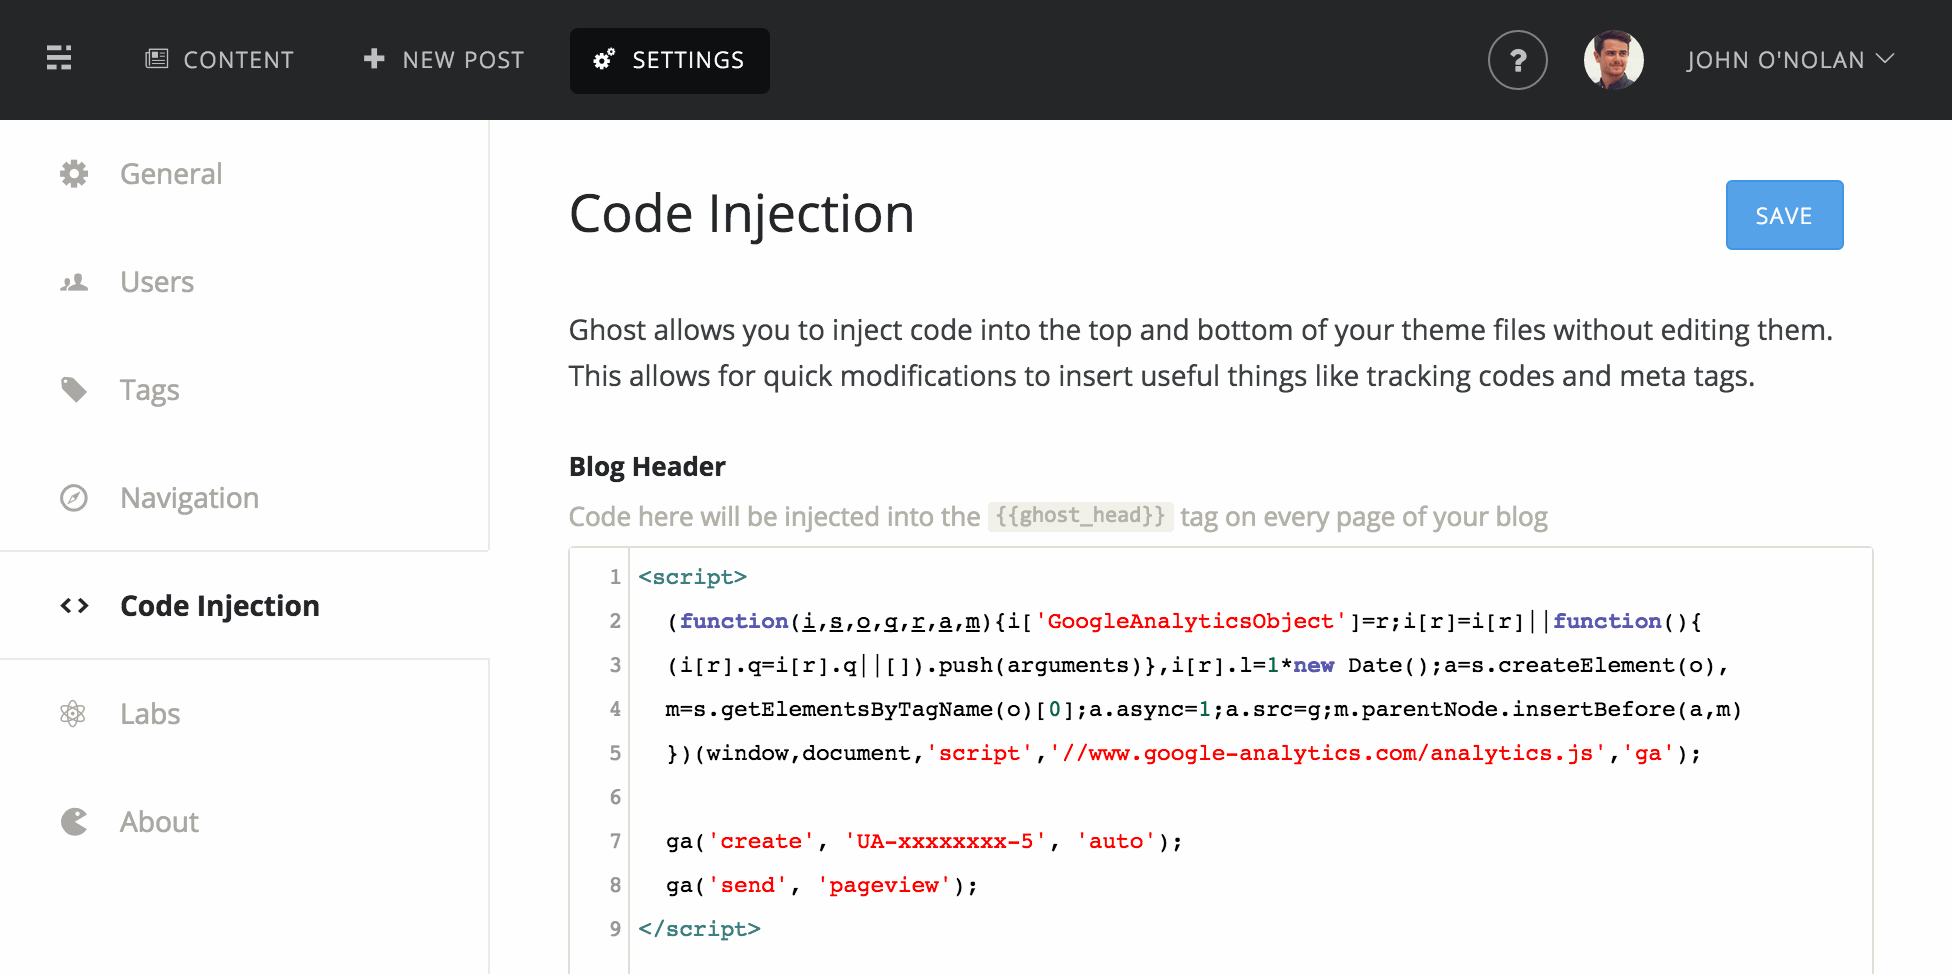 Code Injection